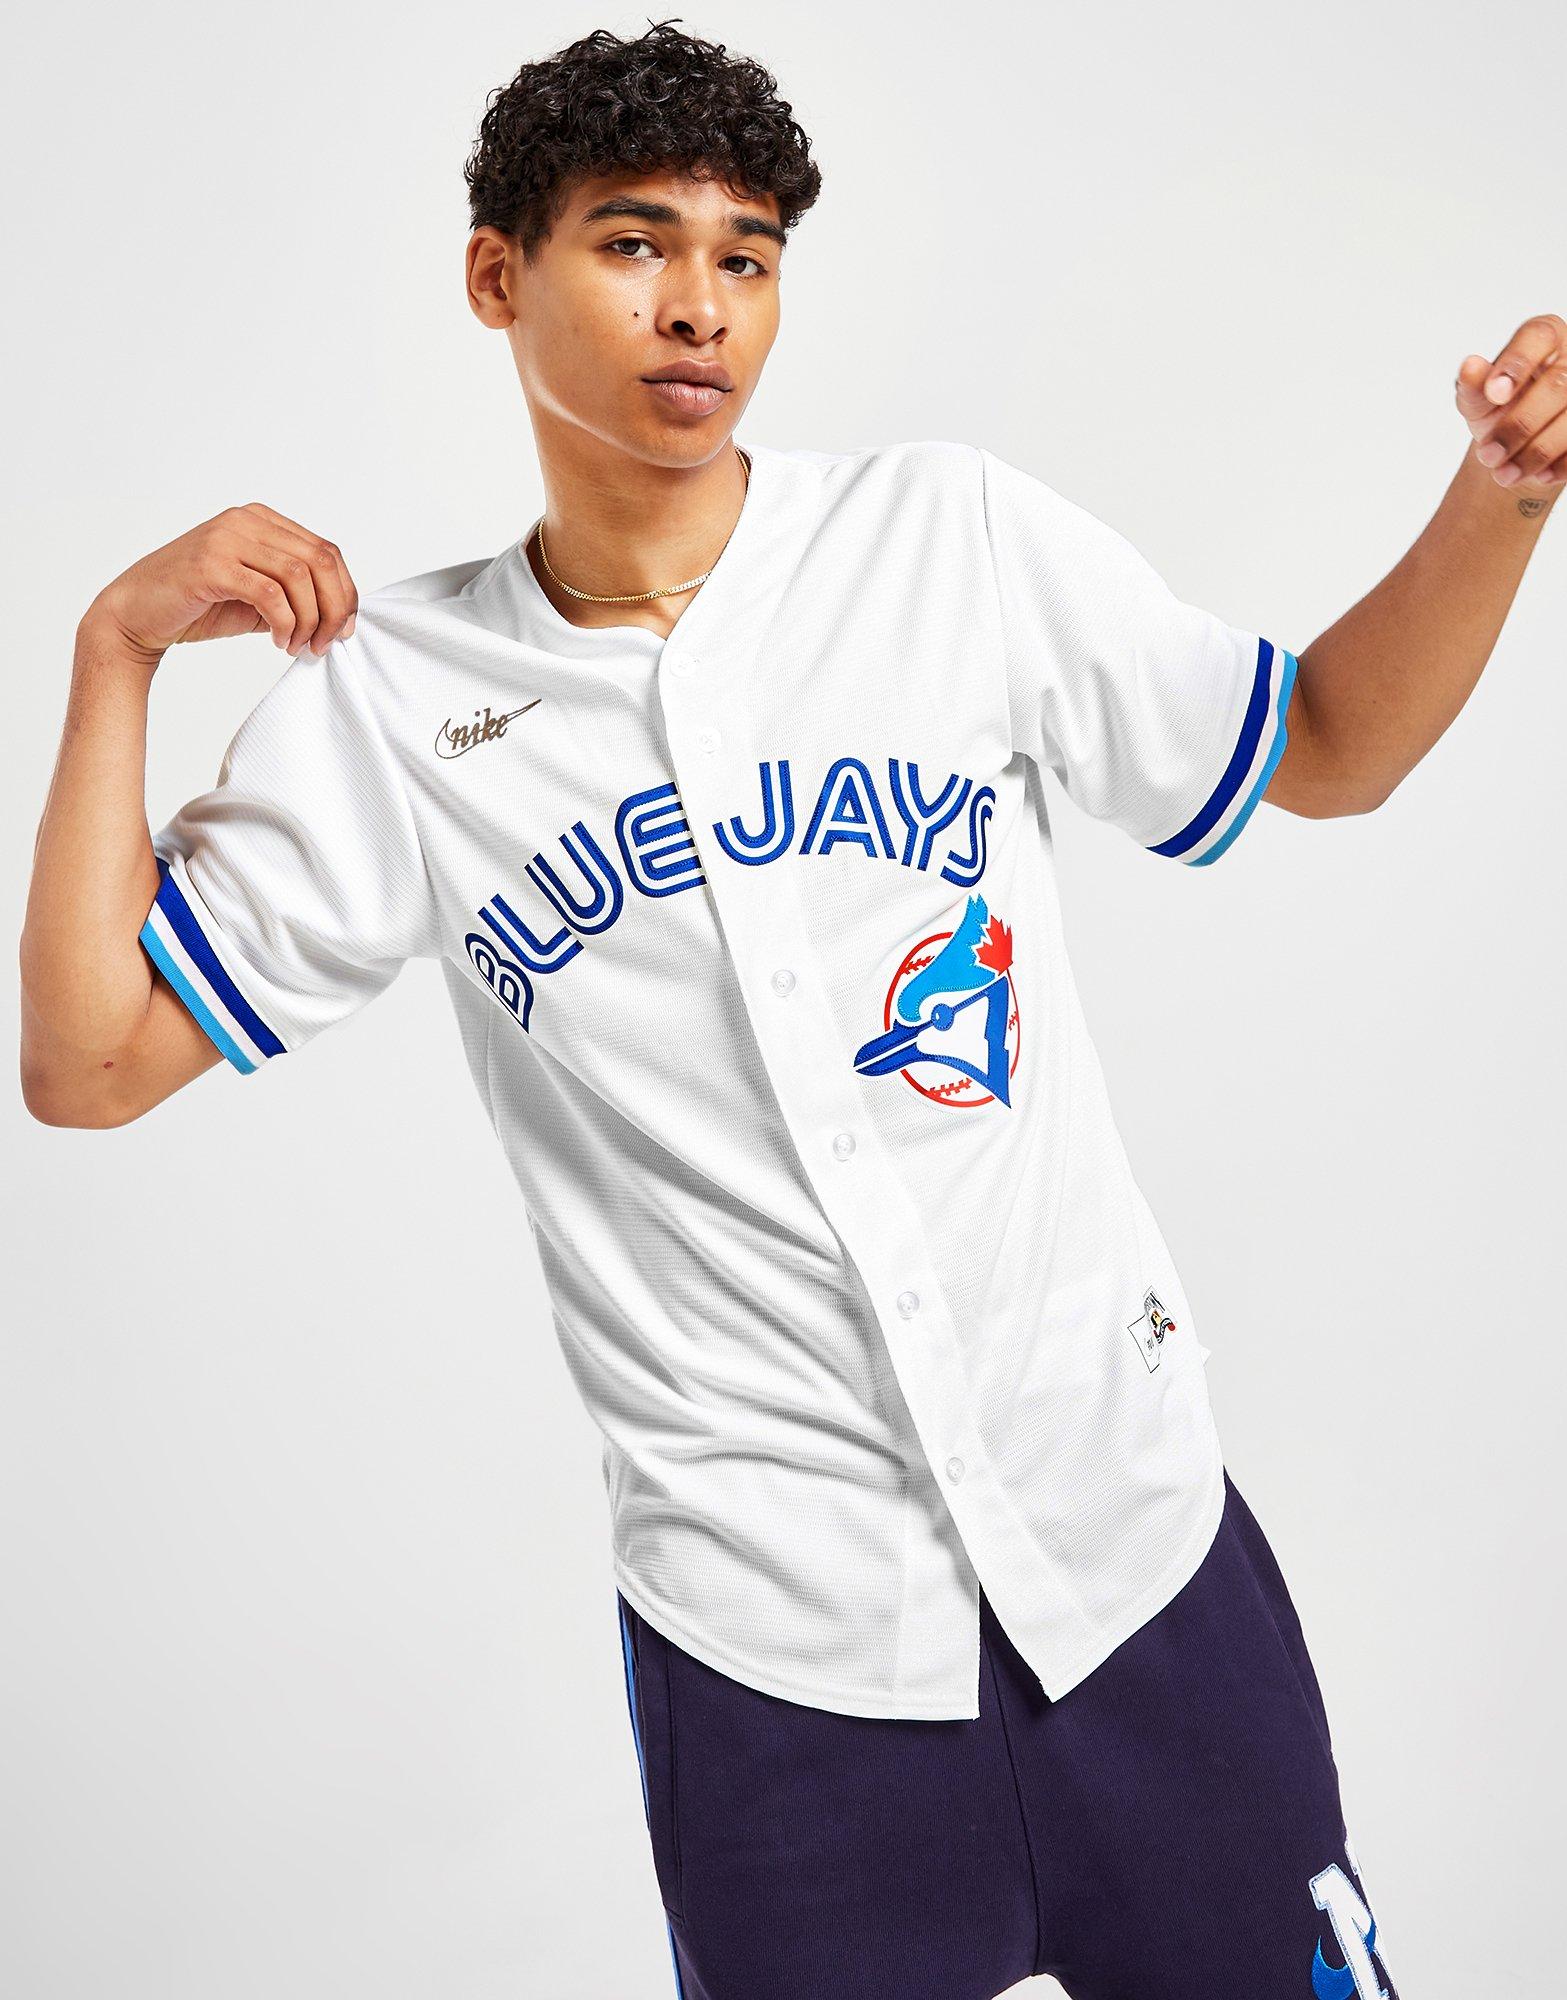 Men's Nike White Toronto Blue Jays Home Cooperstown Collection Team Jersey